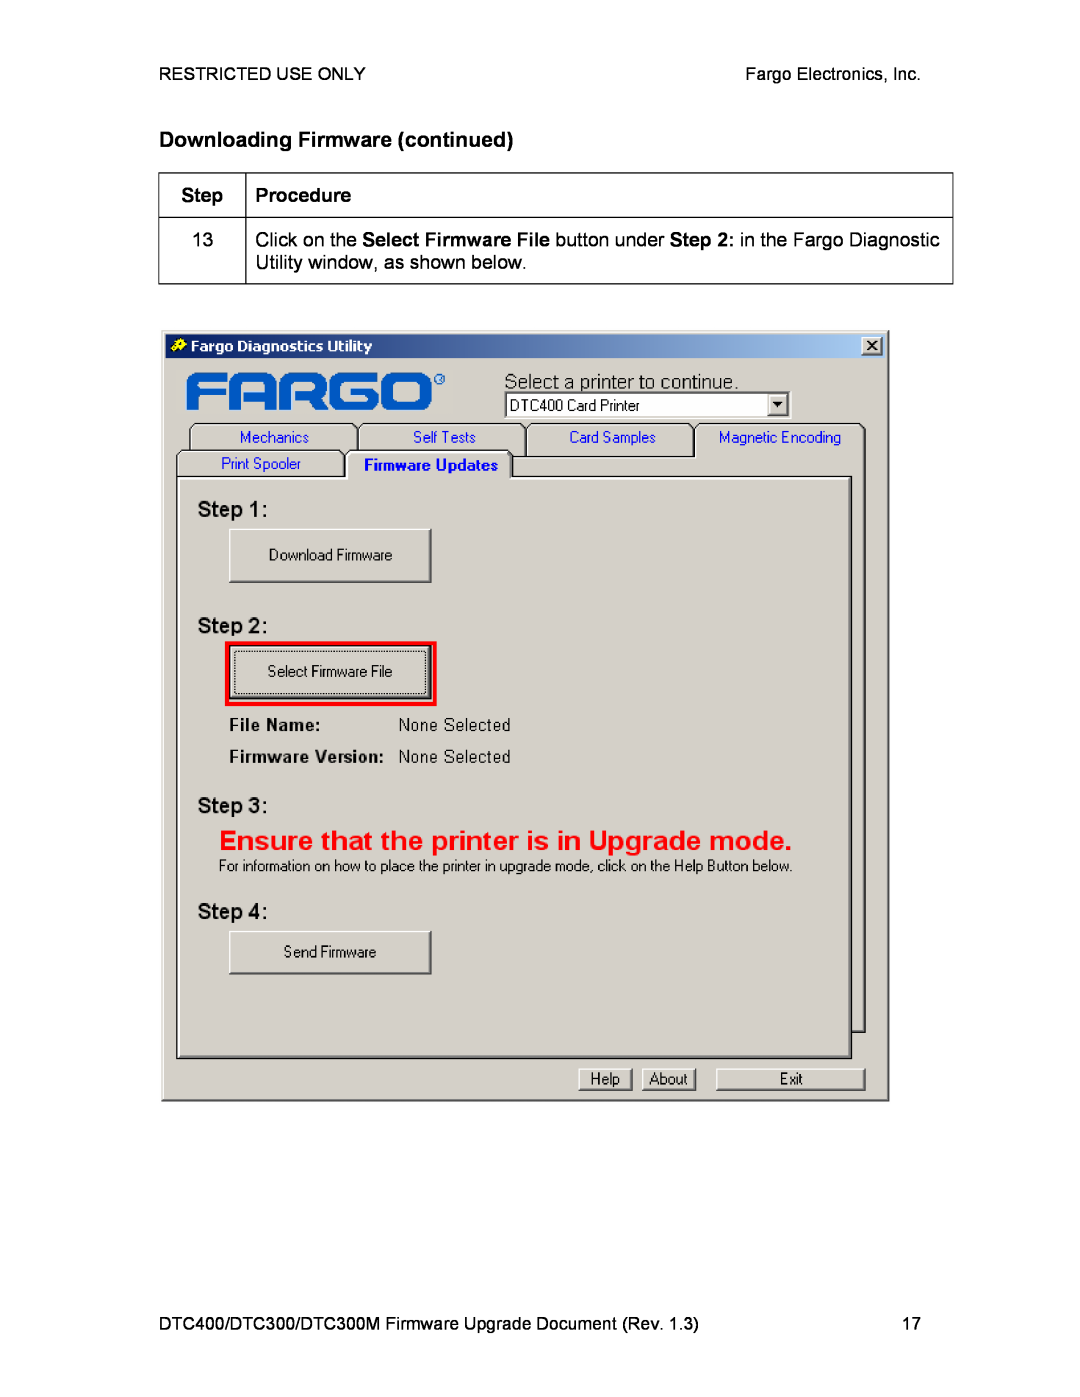 FARGO electronic DTC400, DTC300M manual Downloading Firmware continued, RESTRICTED USE ONLYFargo Electronics, Inc 